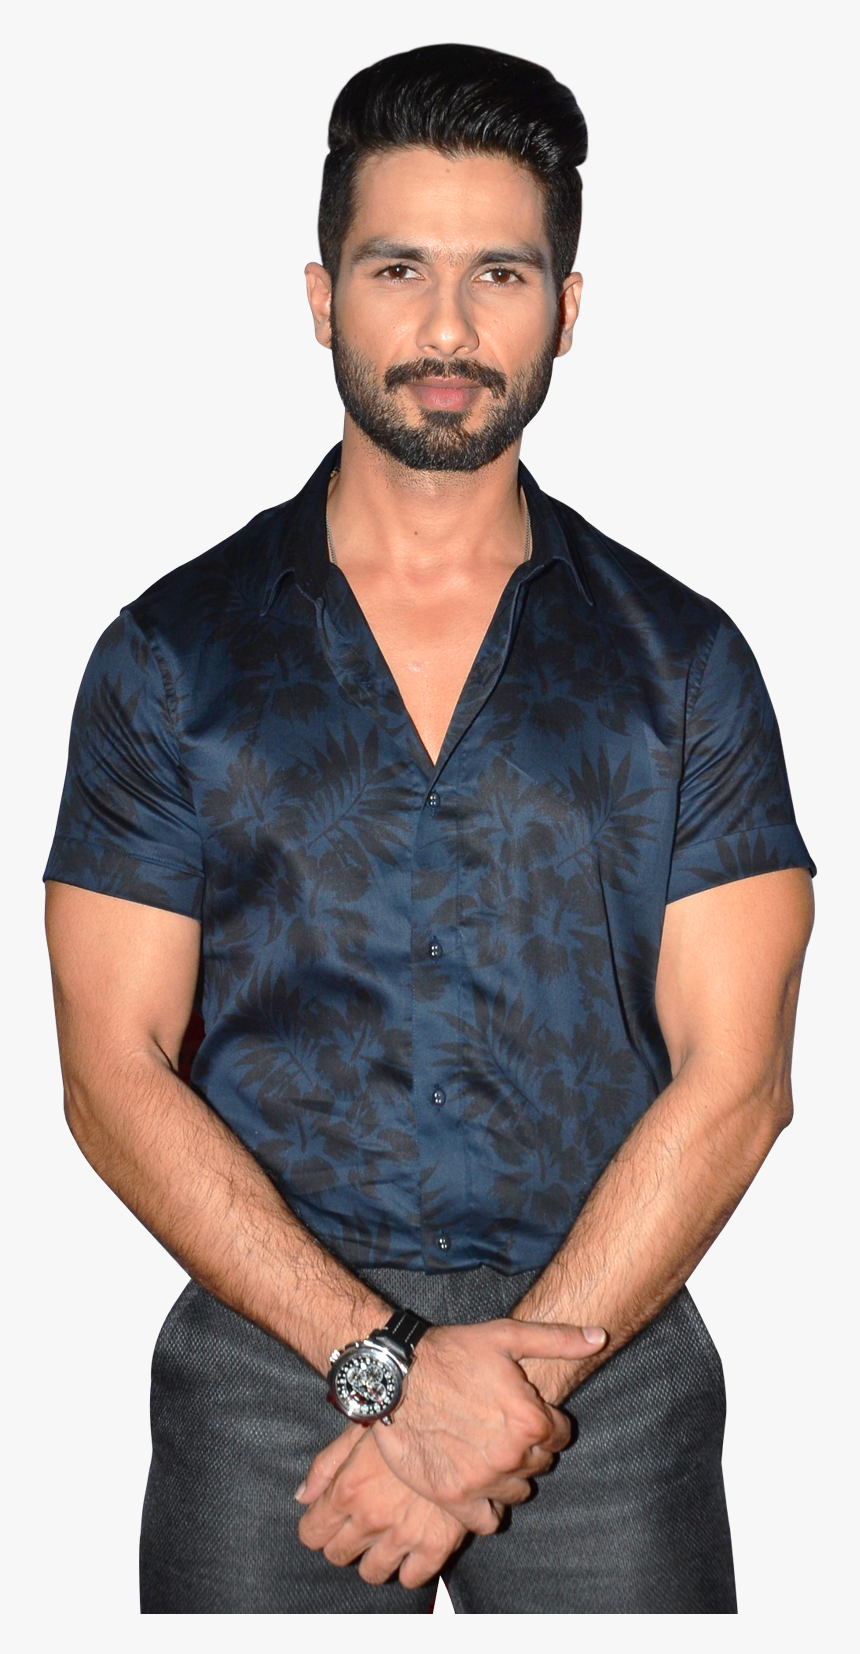 Shahid Kapoor Png Transparent Image - Shahid Kapoor Full Size, Png Download, Free Download